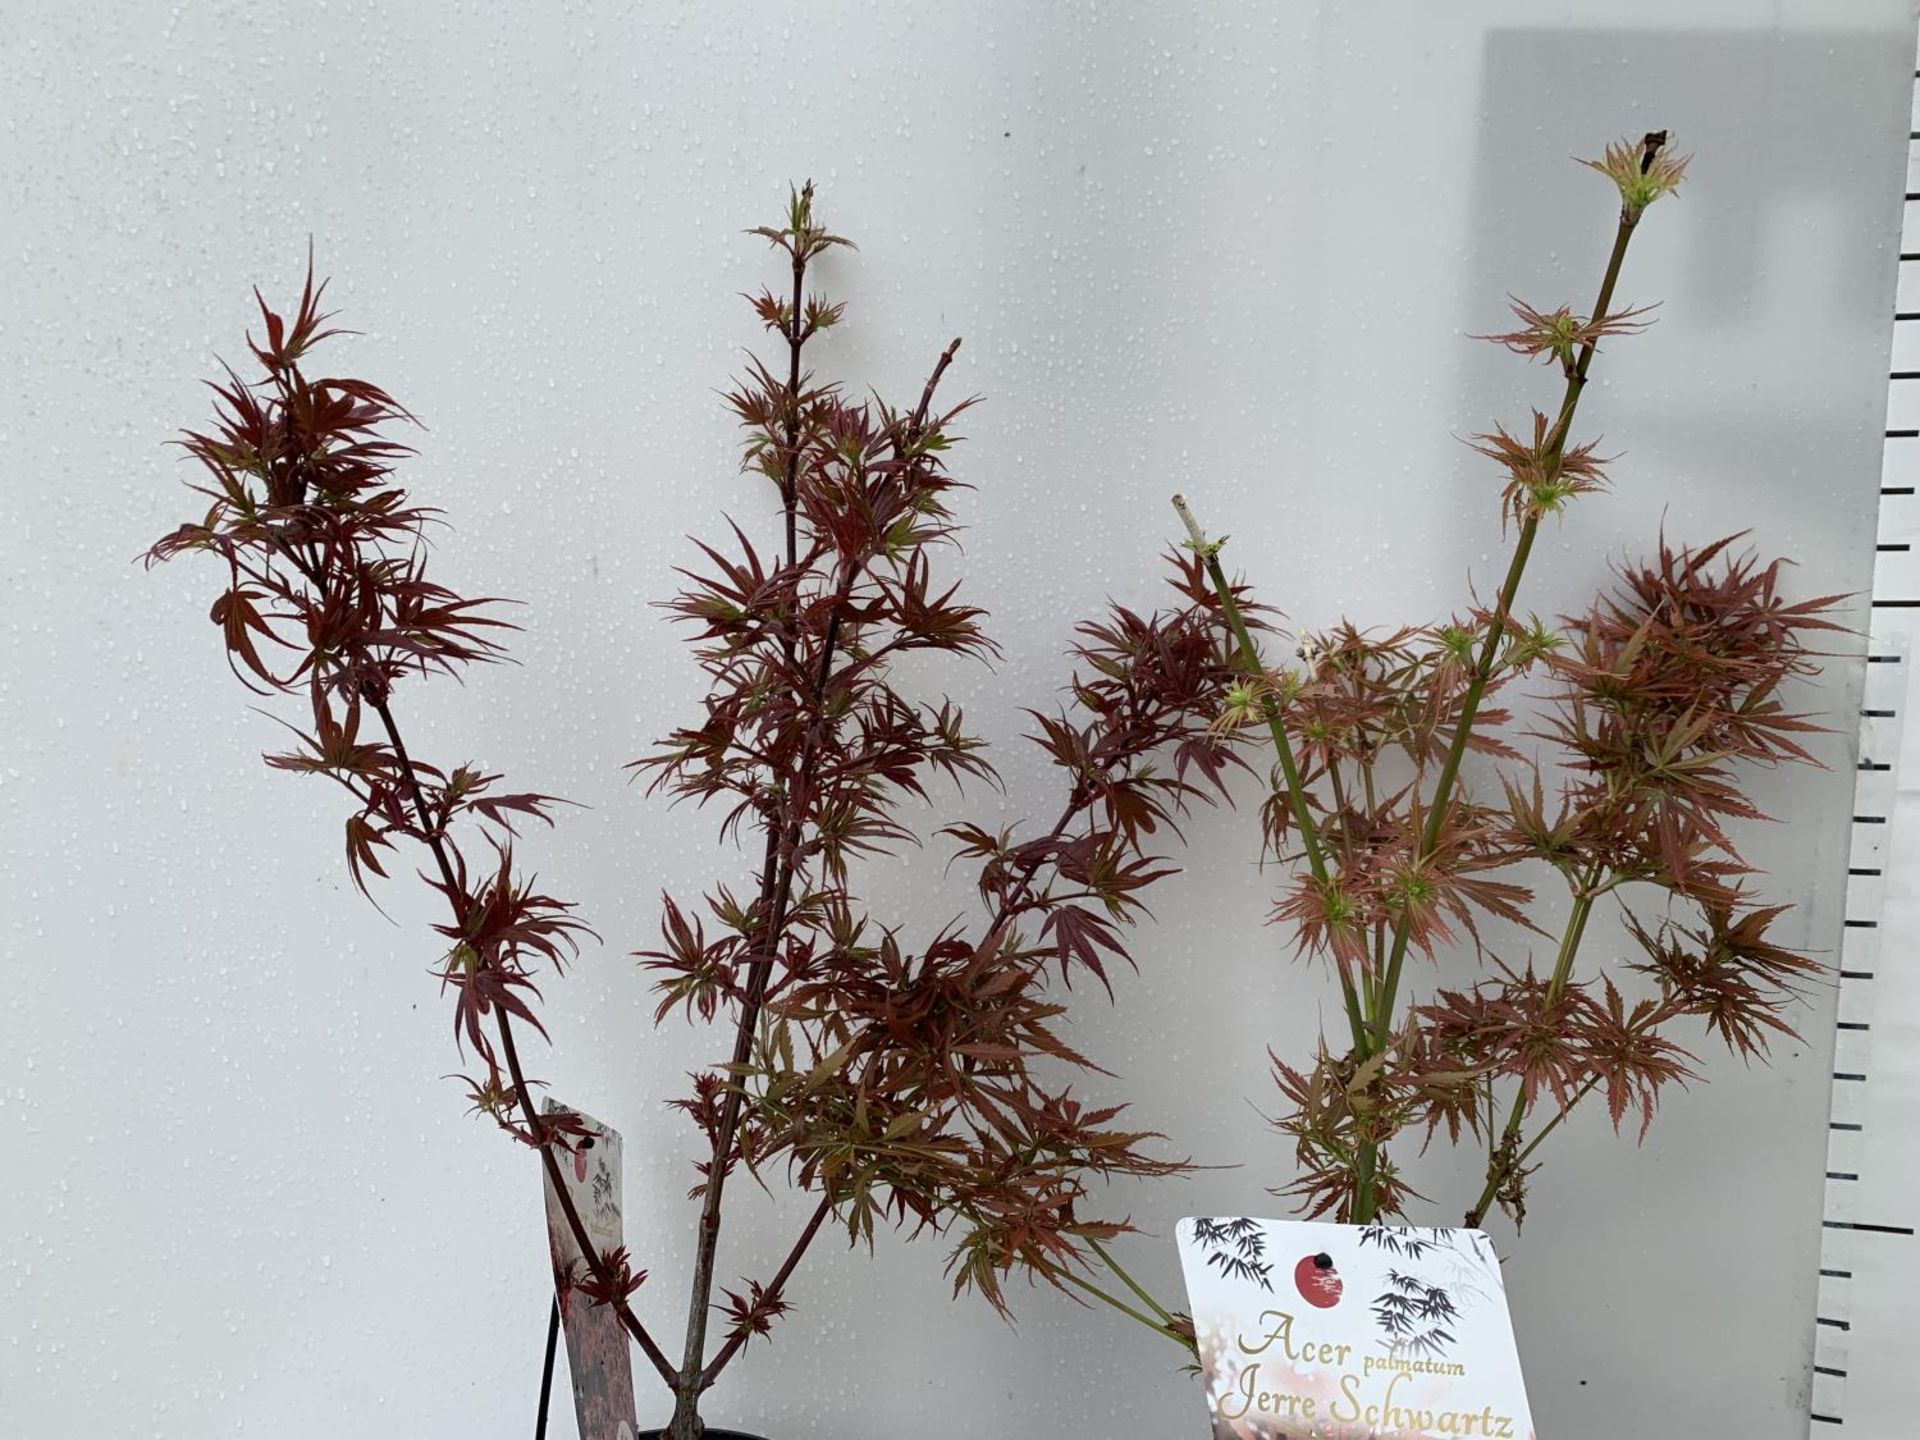 TWO ACER PALMATUMS 'SHAINA' AND 'JERRE SCHWARTZ' APPROX 80CM IN HEIGHT IN 3 LTR POTS PLUS VAT TO - Image 8 of 11